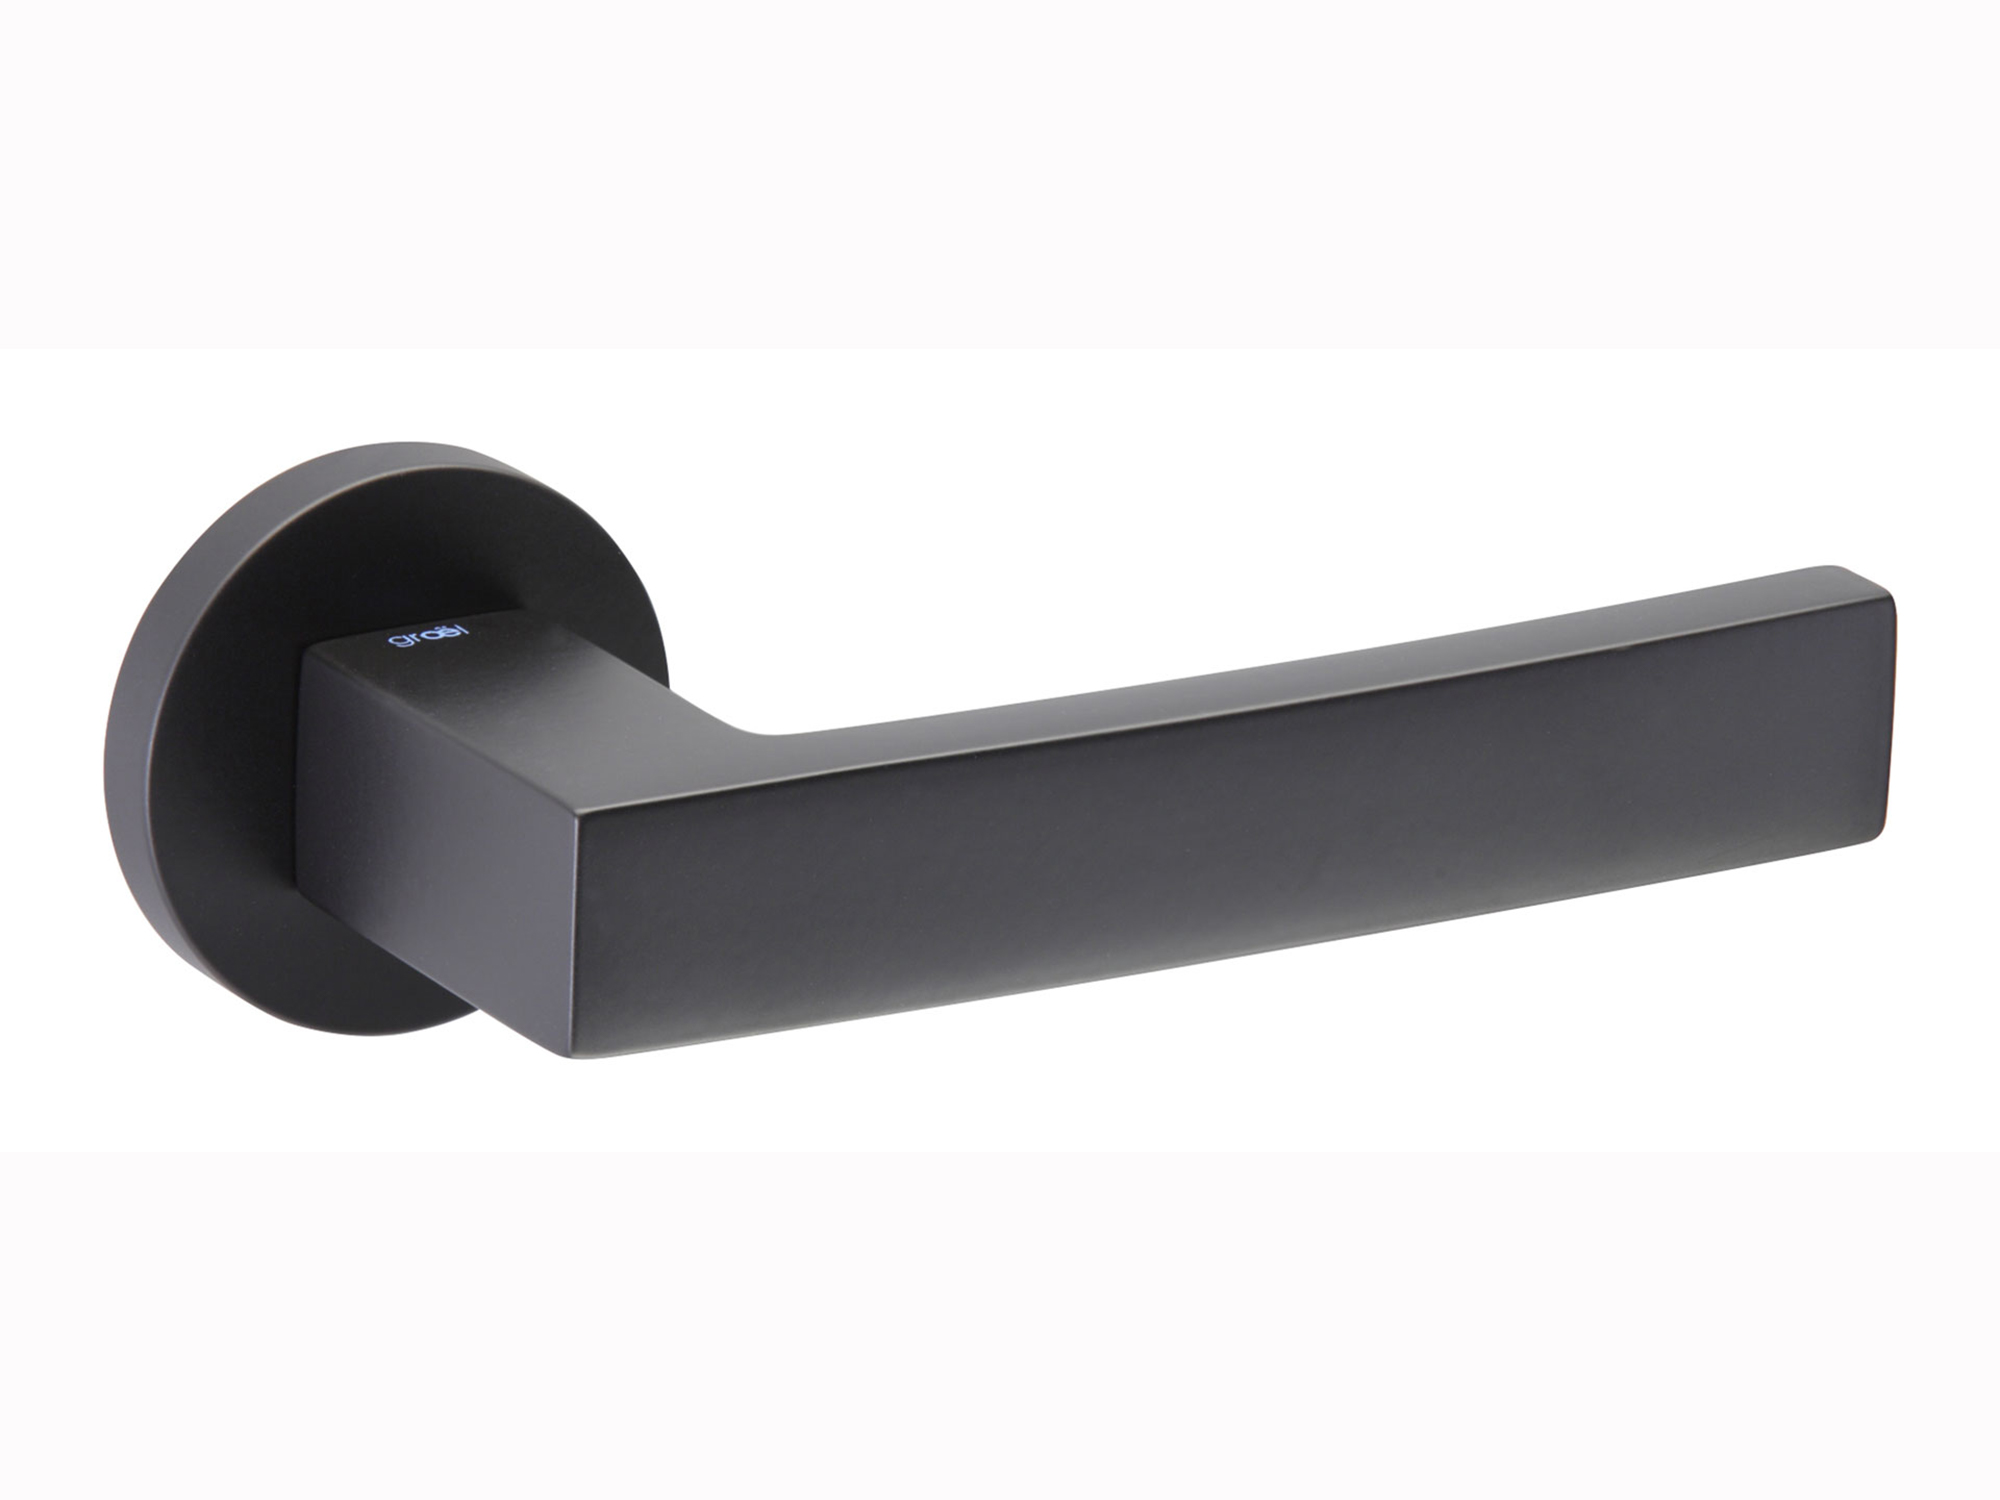 UNICORP A3591-14 1/4 Round Pull Handle Int 8-32 Thd Brass Black Oxide QTY-10 1.5 high x 4 Lng